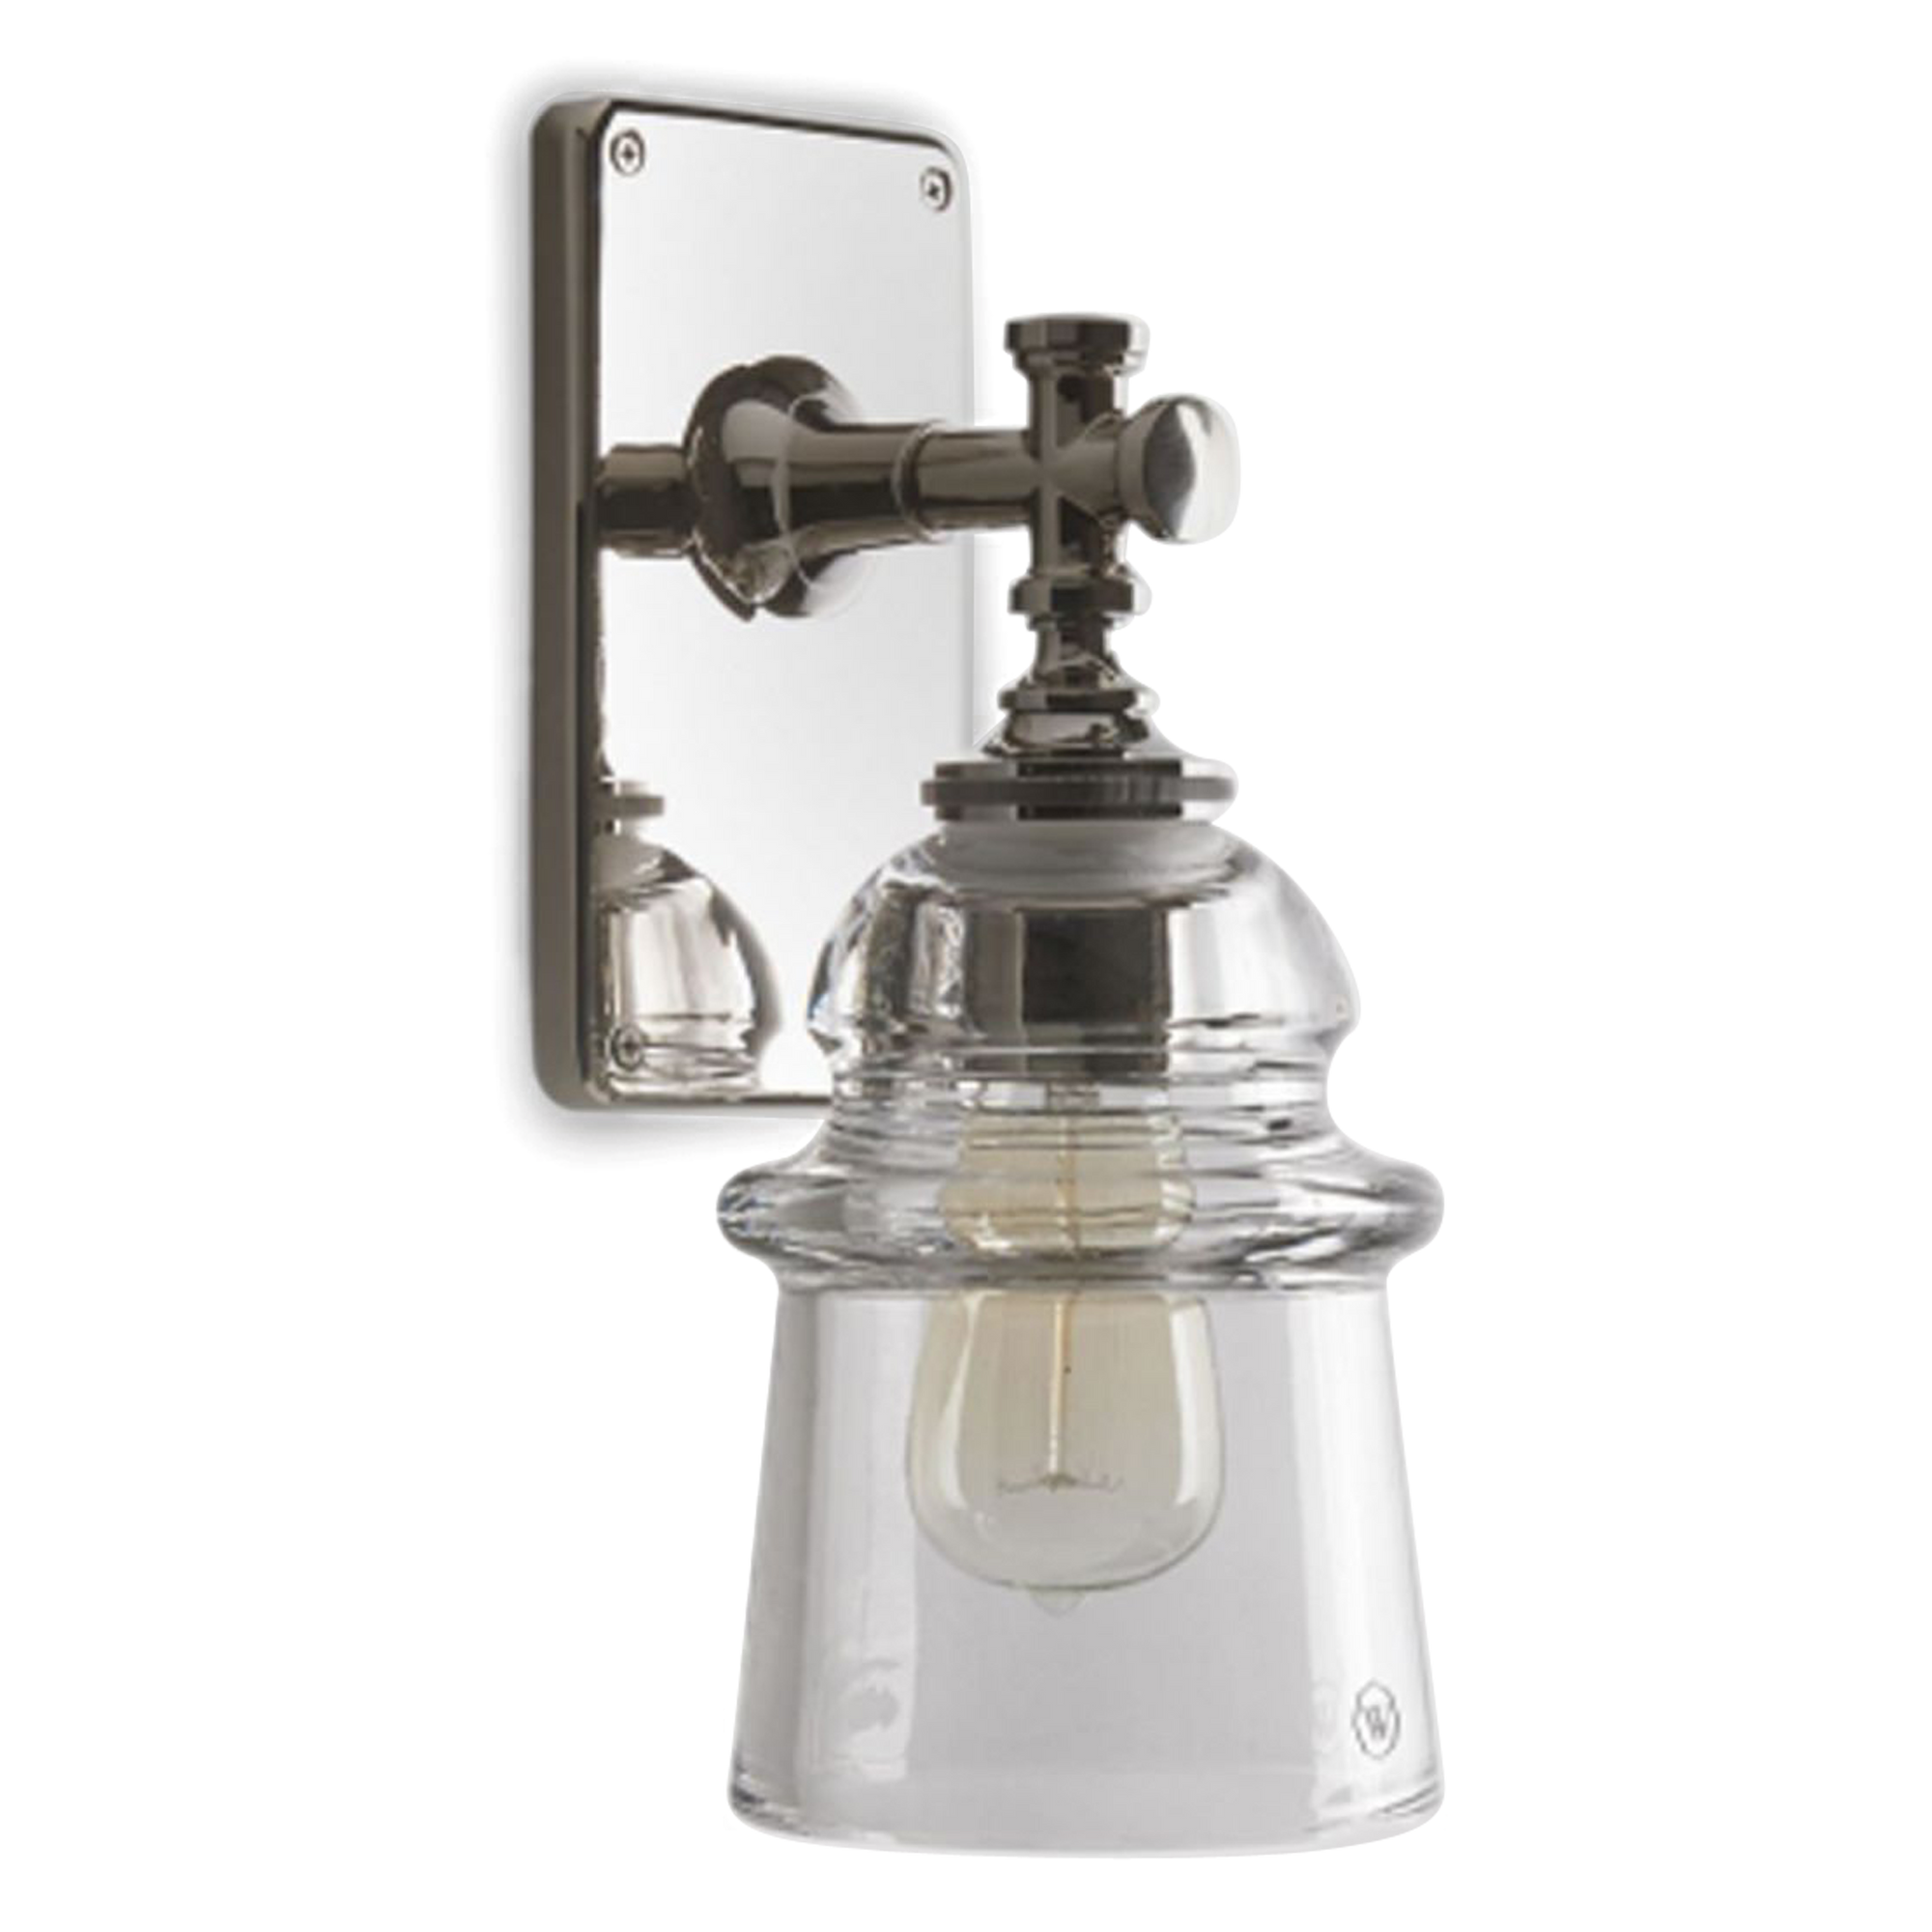 An industrial nickel sconce with a clear glass shade.